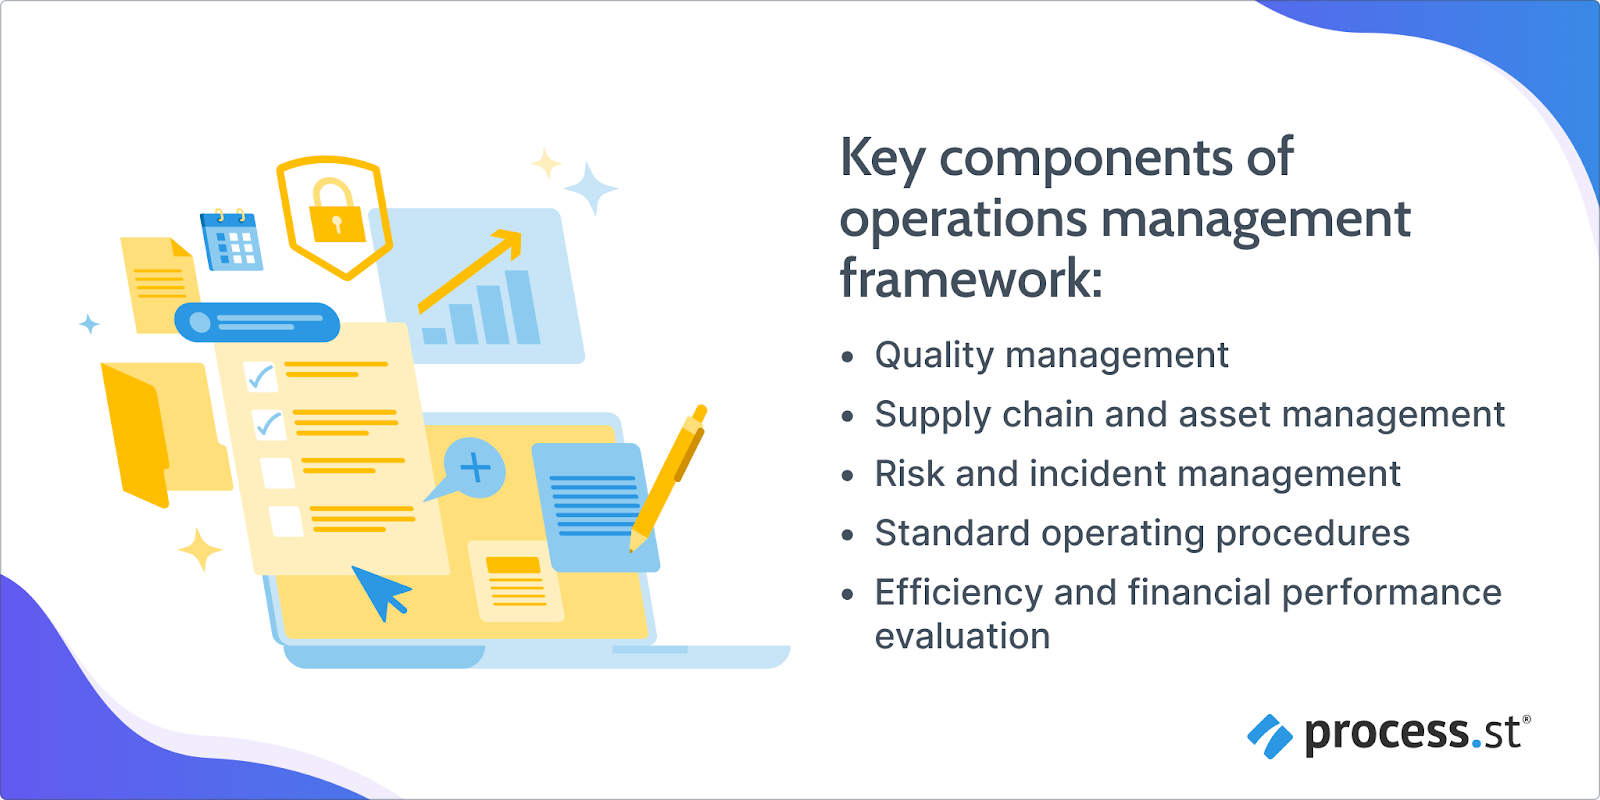 Image showing the key components of an operations management framework